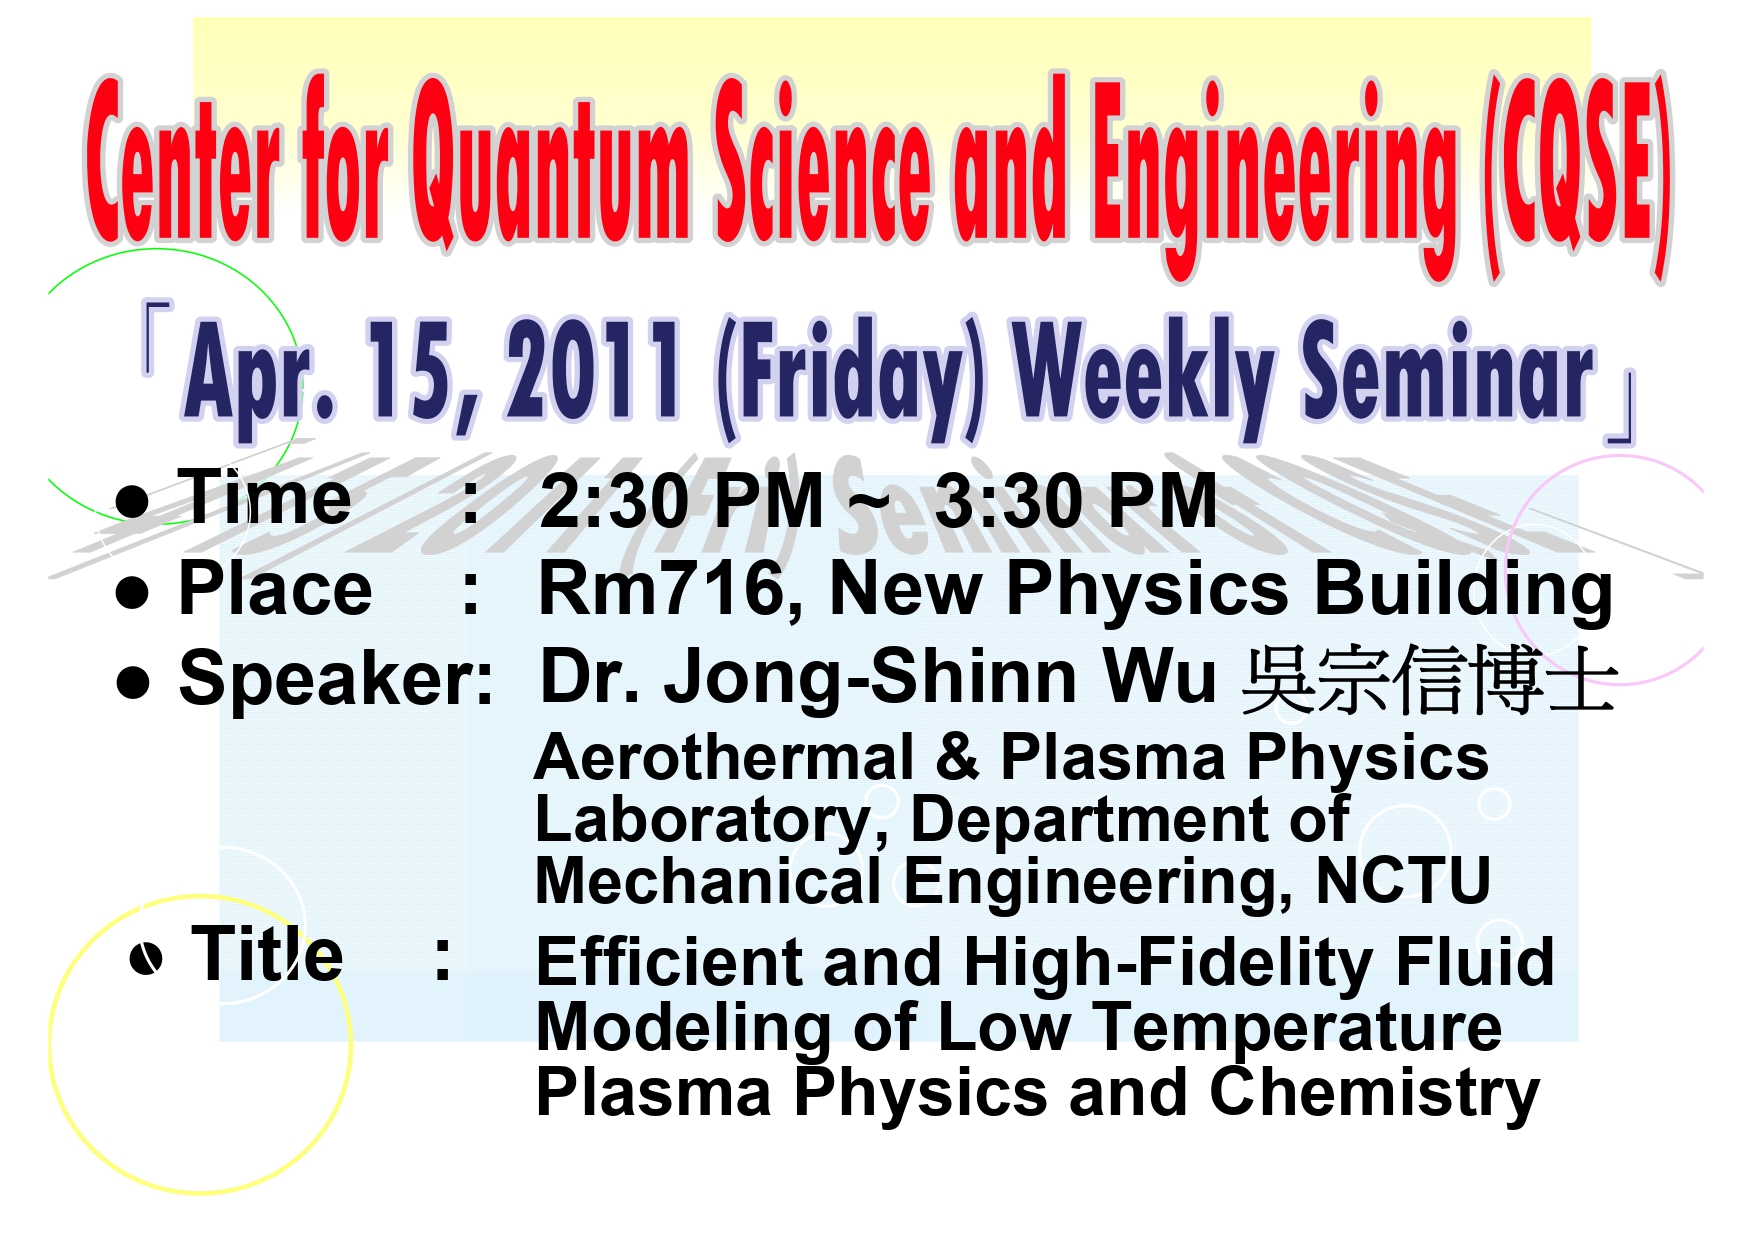 Seminar of Center for Quantum Science and Engineering (CQSE)